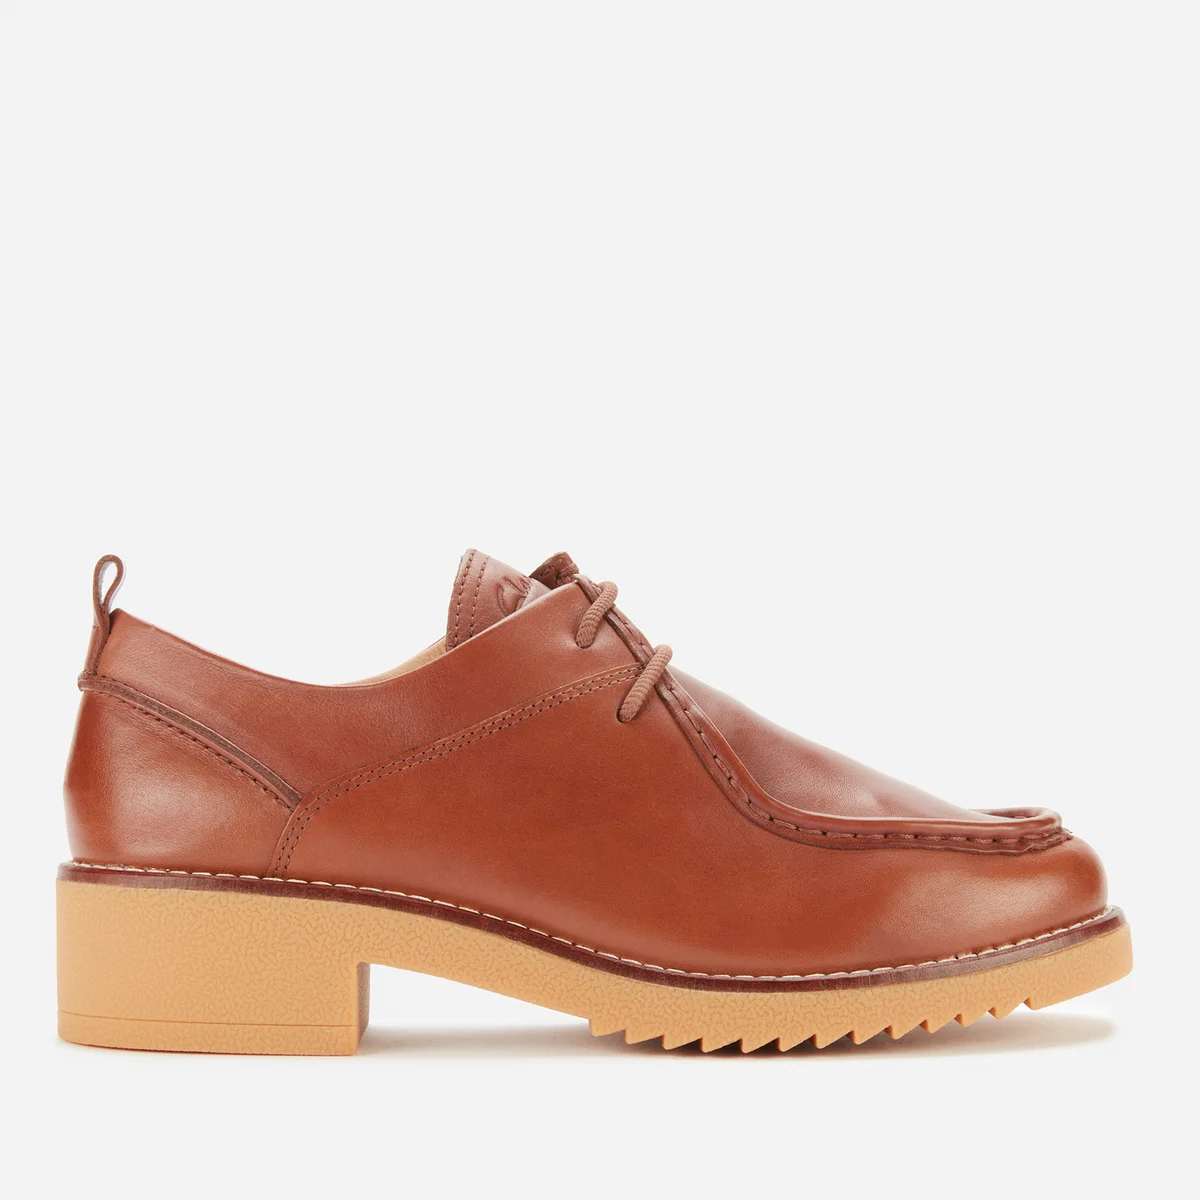 Clarks Eden Mid Lace Brogues - Dark Tan Leather Image 1